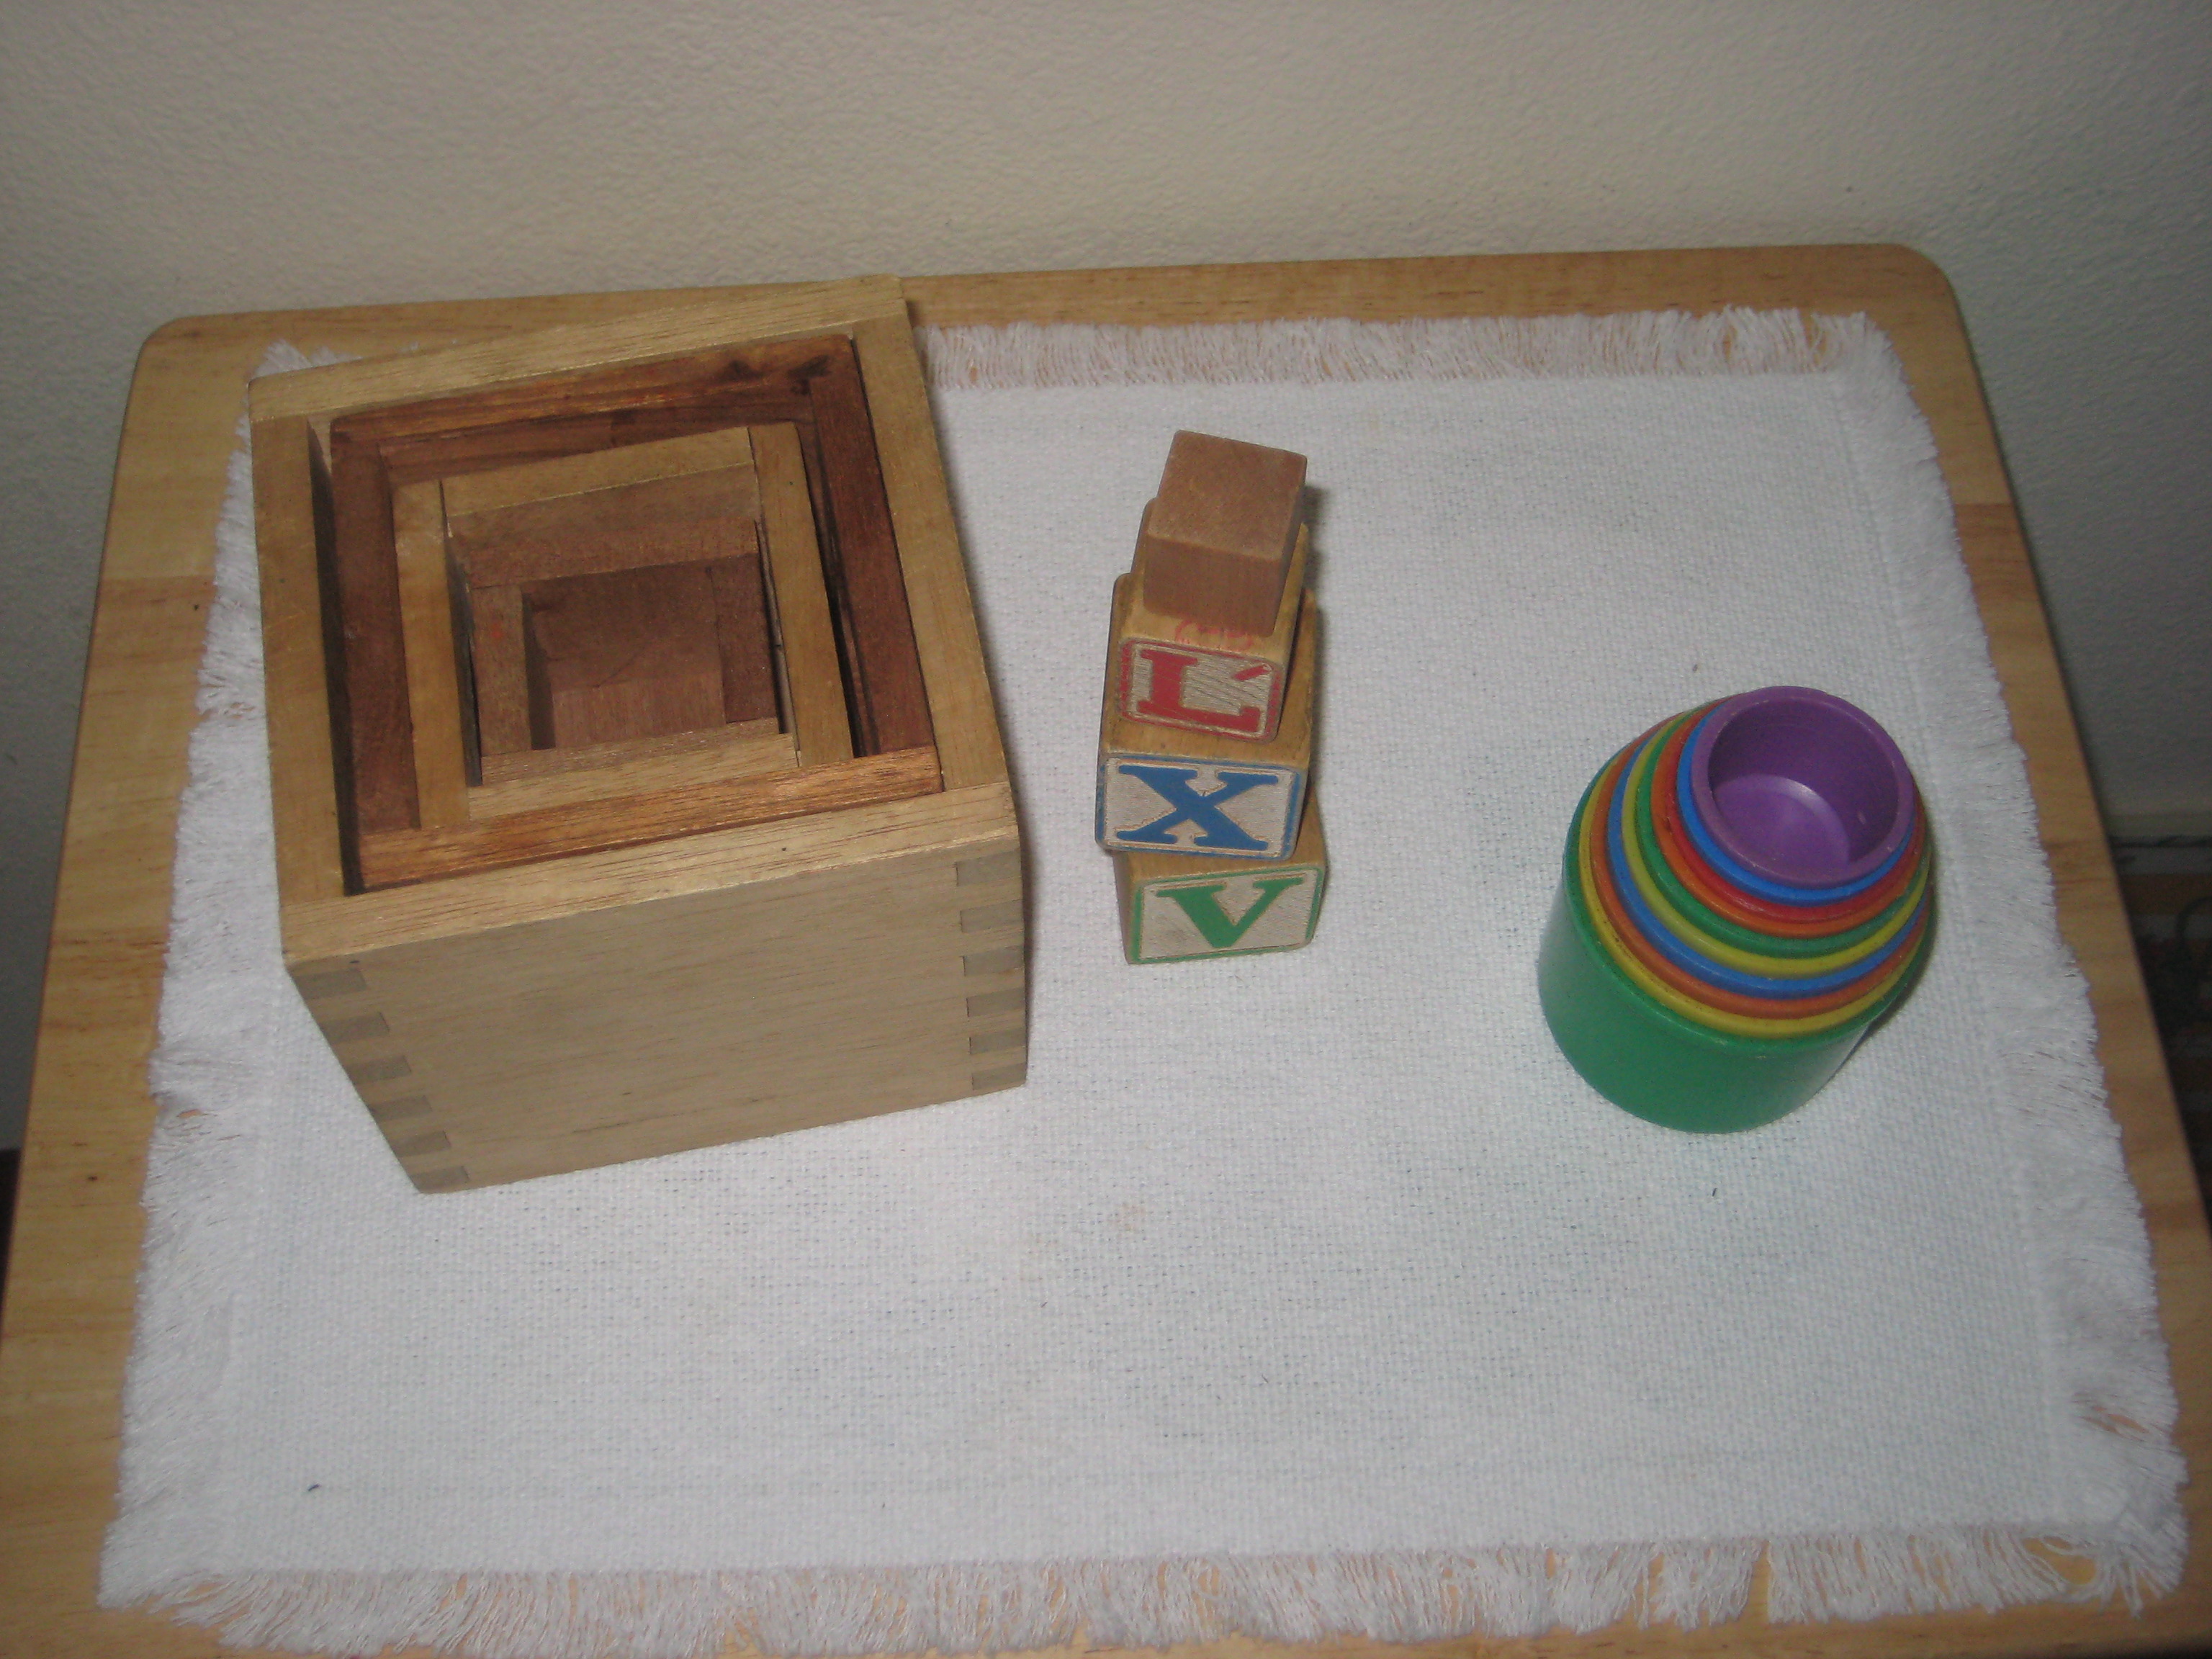 Nesting Cups and Boxes